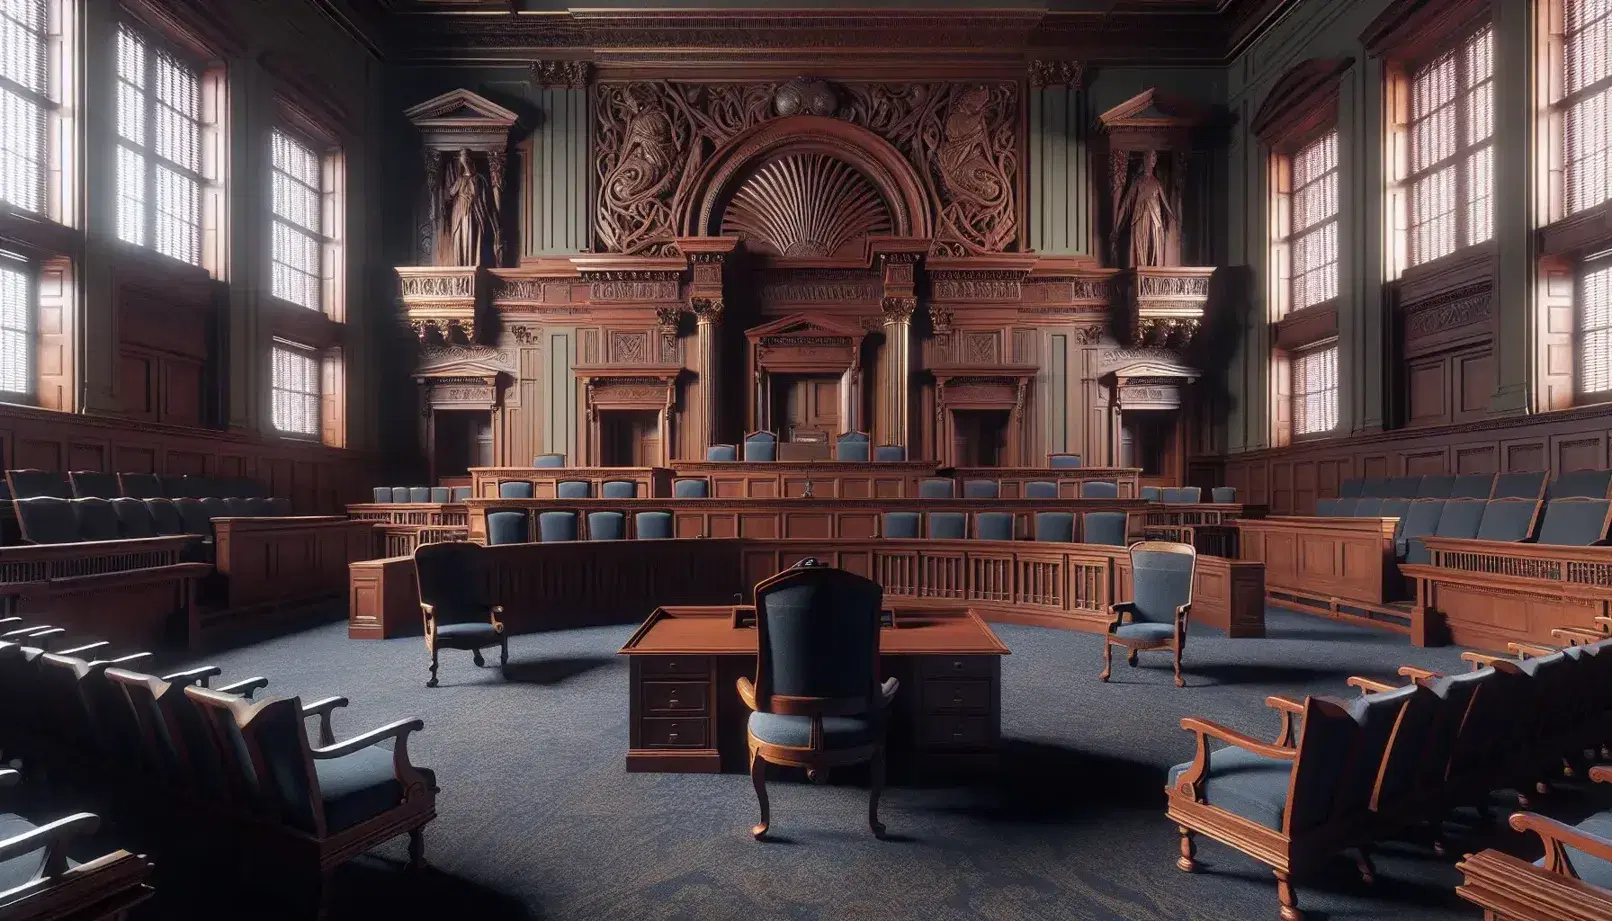 Elegant courtroom interior with a polished mahogany judge's bench, dark blue carpet, wooden spectator chairs with blue cushions, and tall, light-filtering windows.